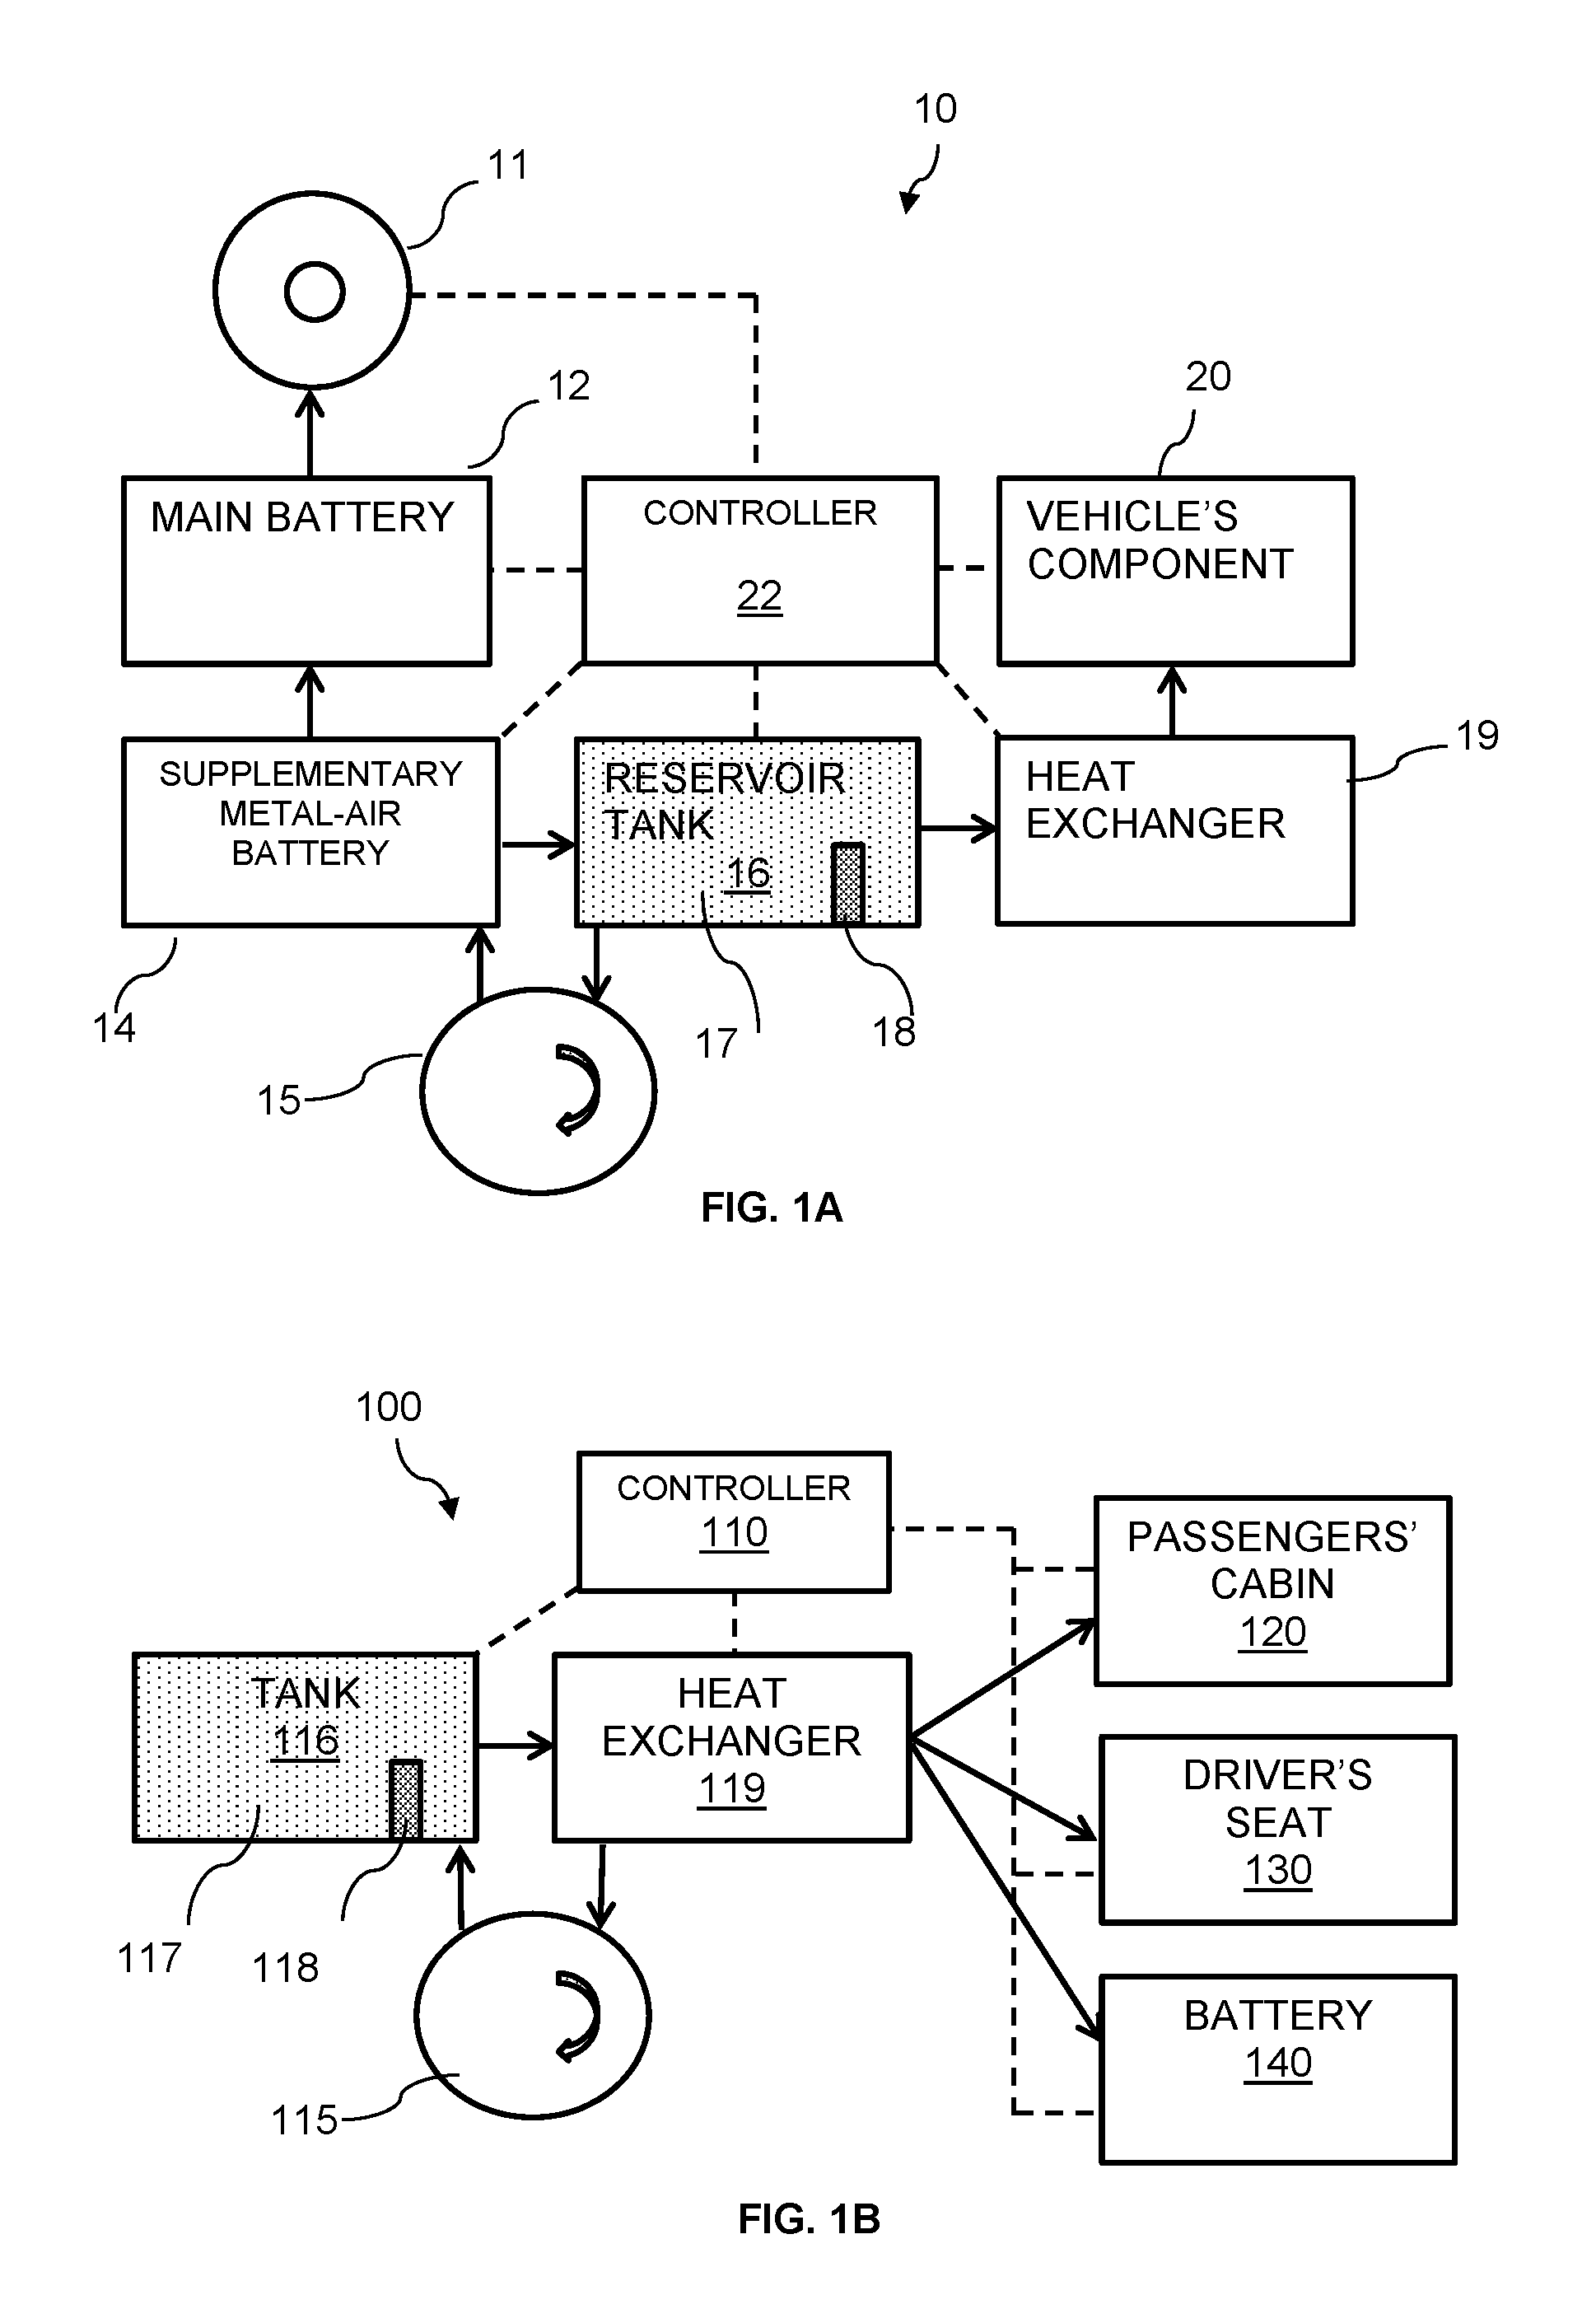 Thermal battery for heating vehicles